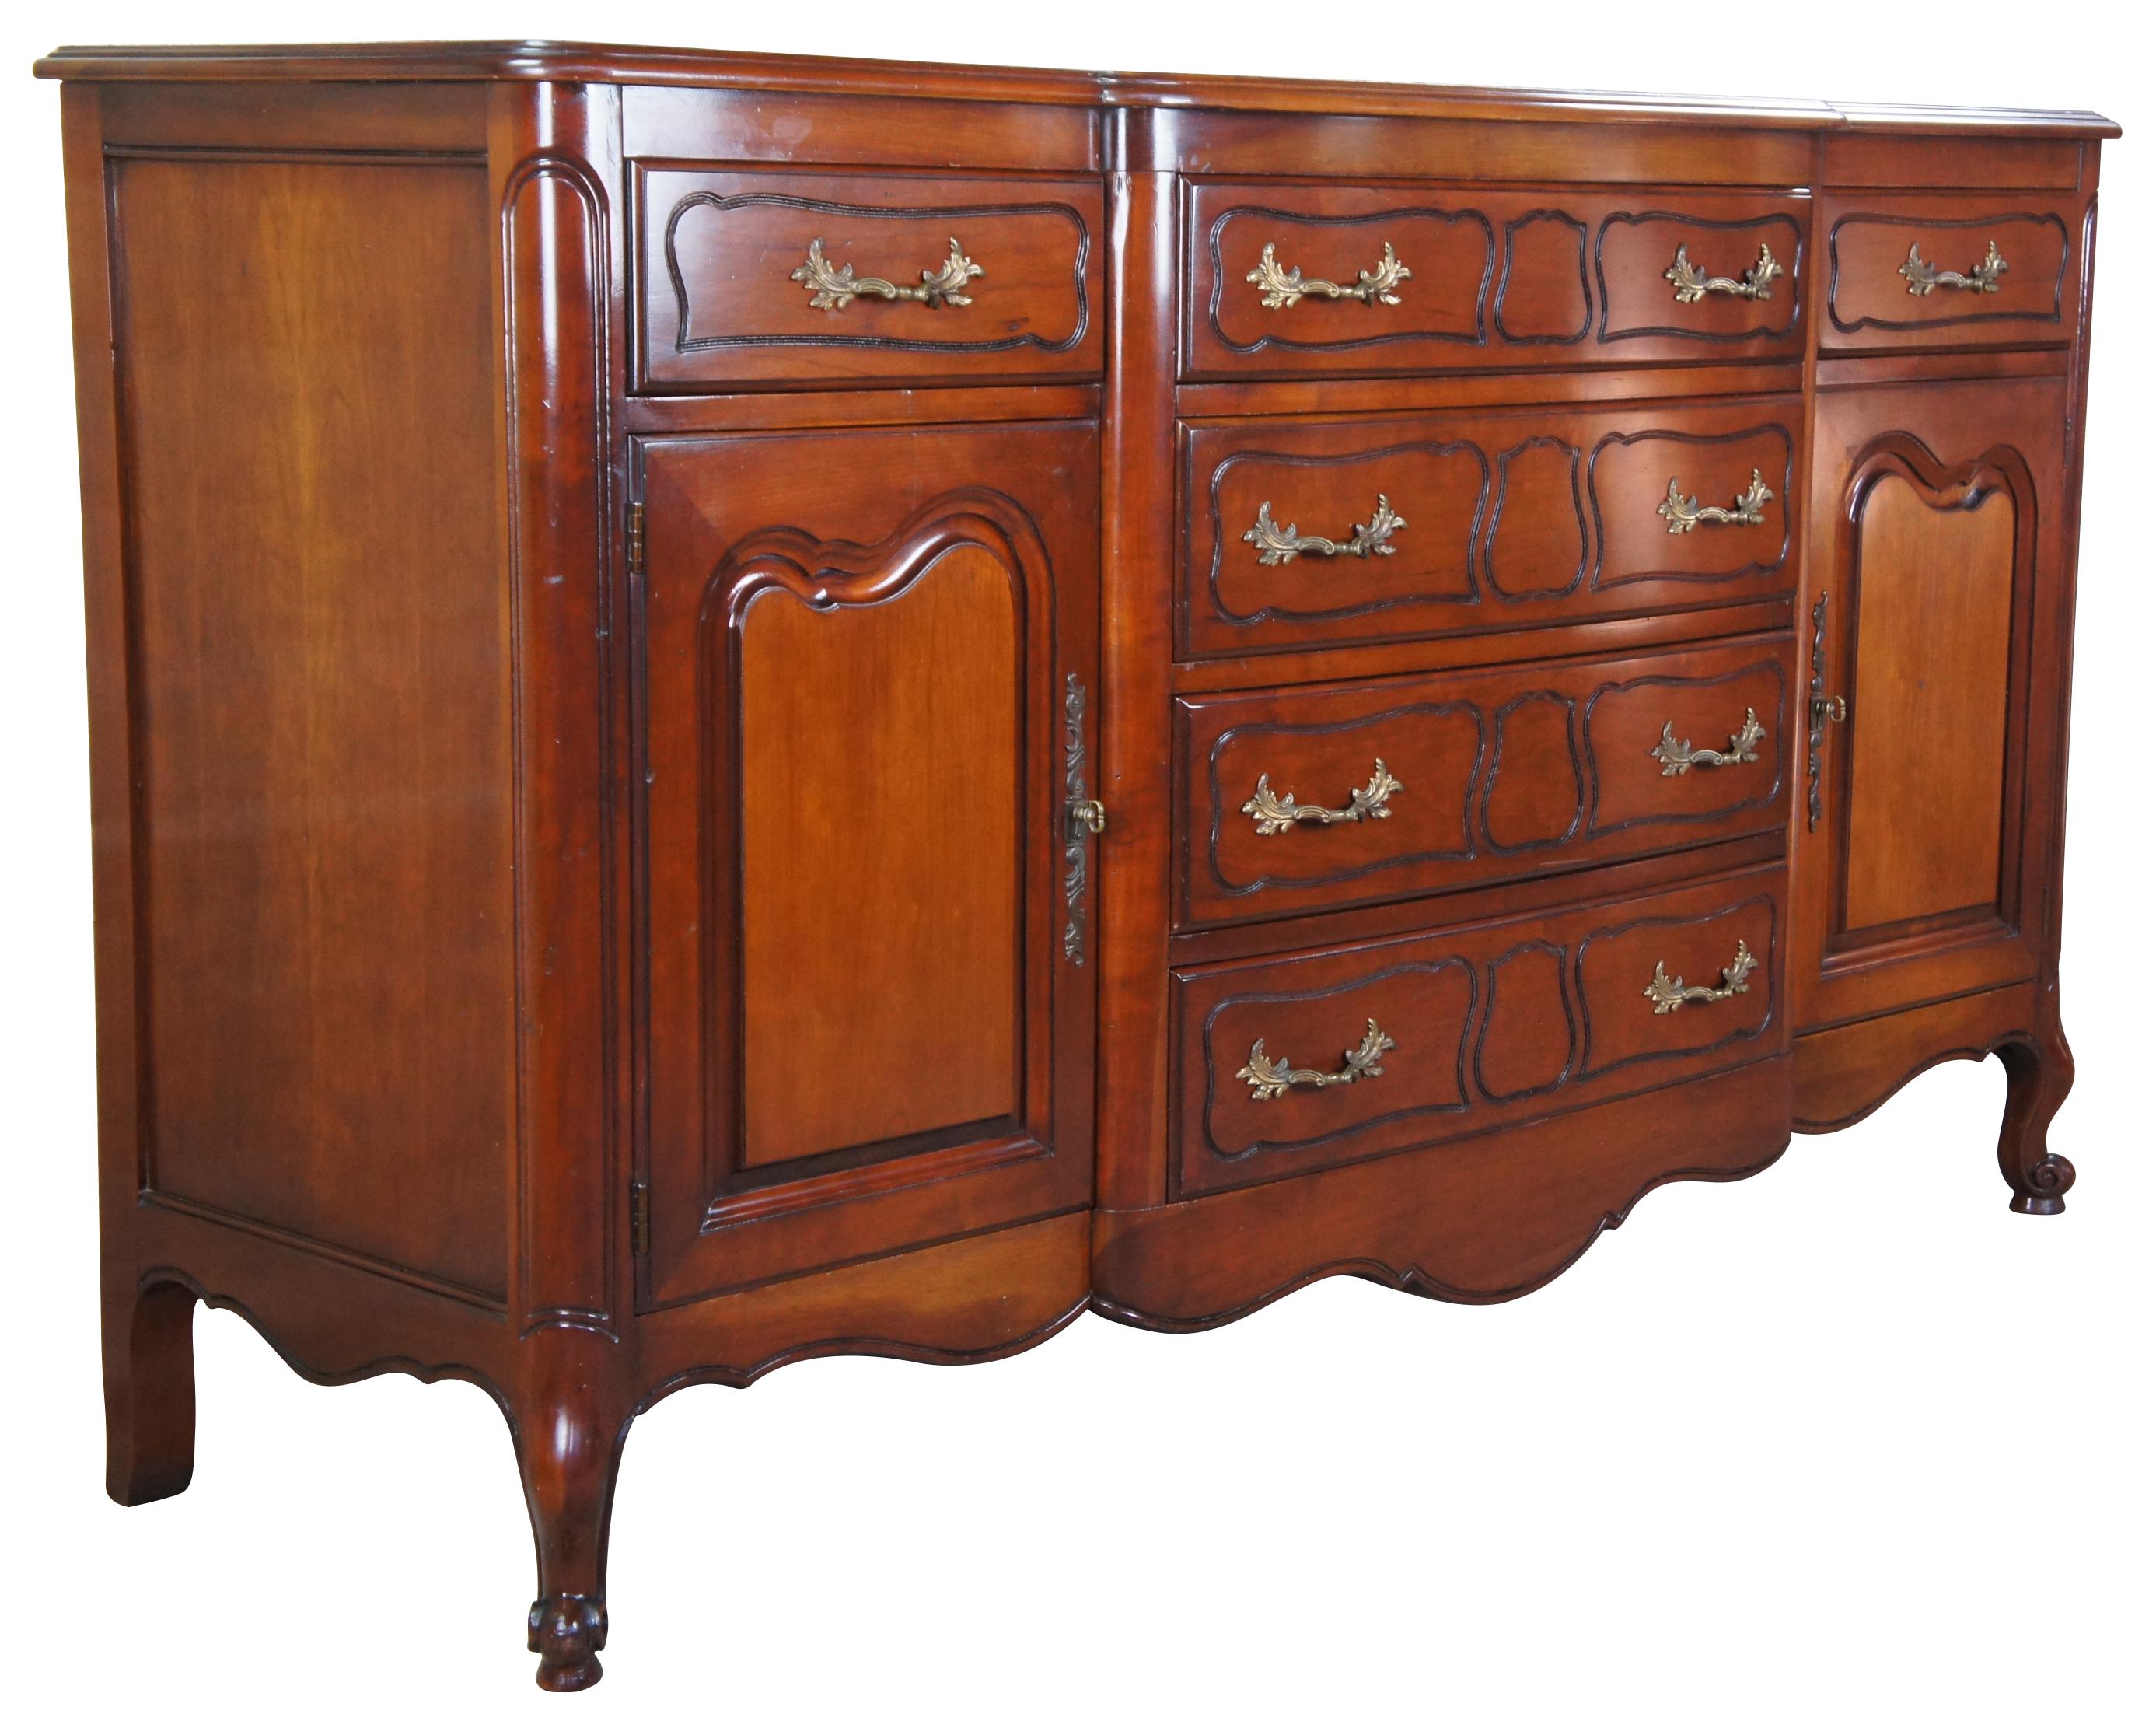 Vintage 1985 Drexel heritage French Provincial buffet or server. Made of cherry featuring rectangular form with a bowed front center of four drawers flanked by two more drawers and two cabinets, including one removable silverware tray with handles,